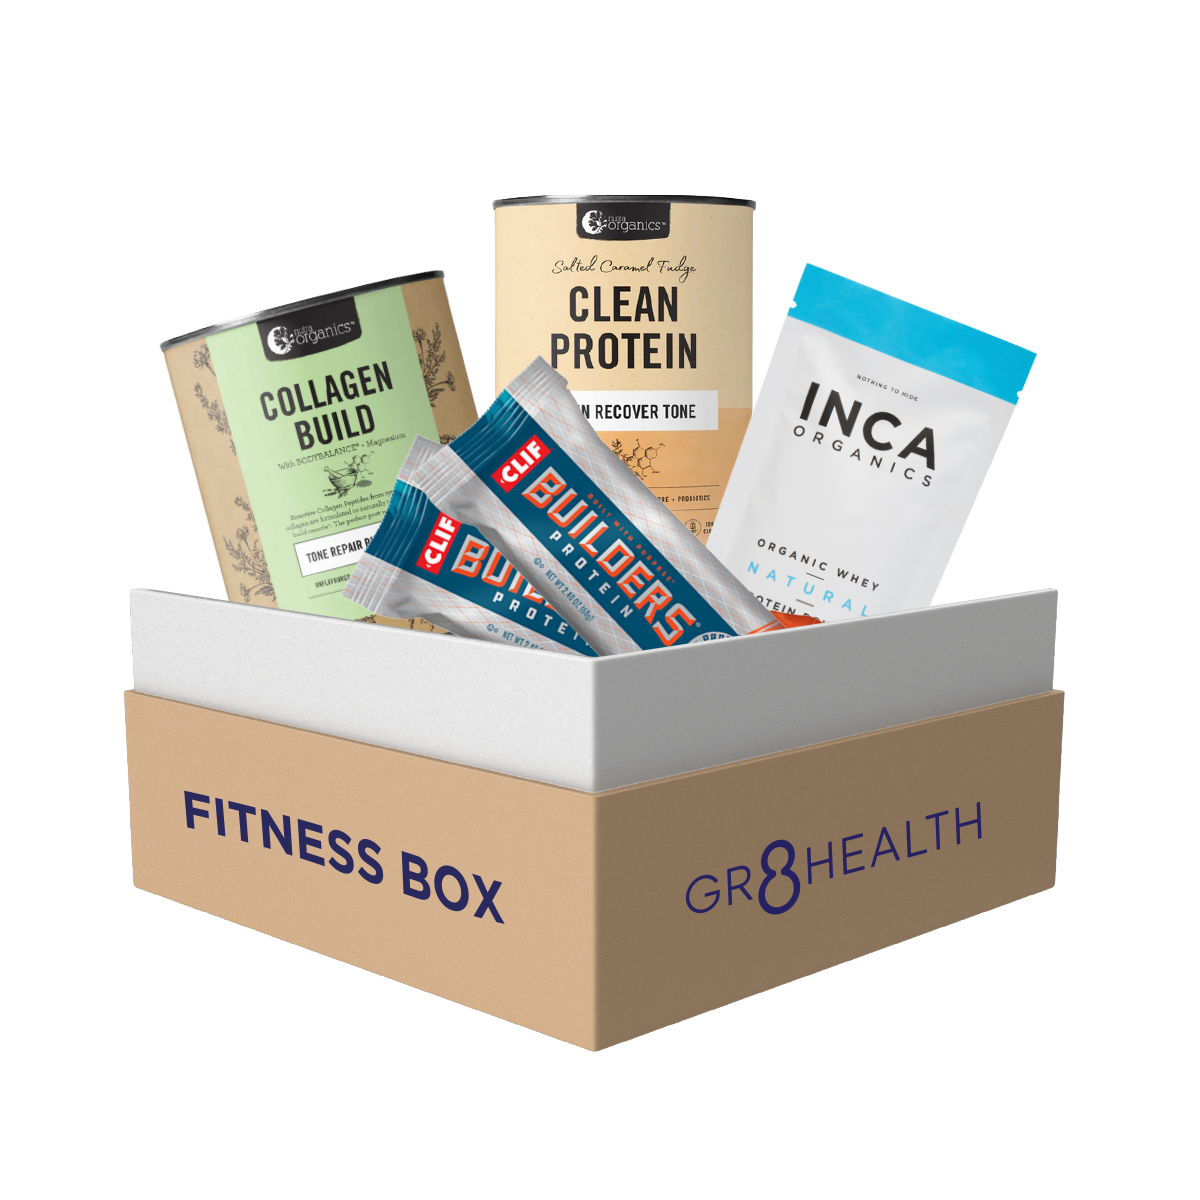 Image of Spring Fitness Box - Galted Coronell Ty 